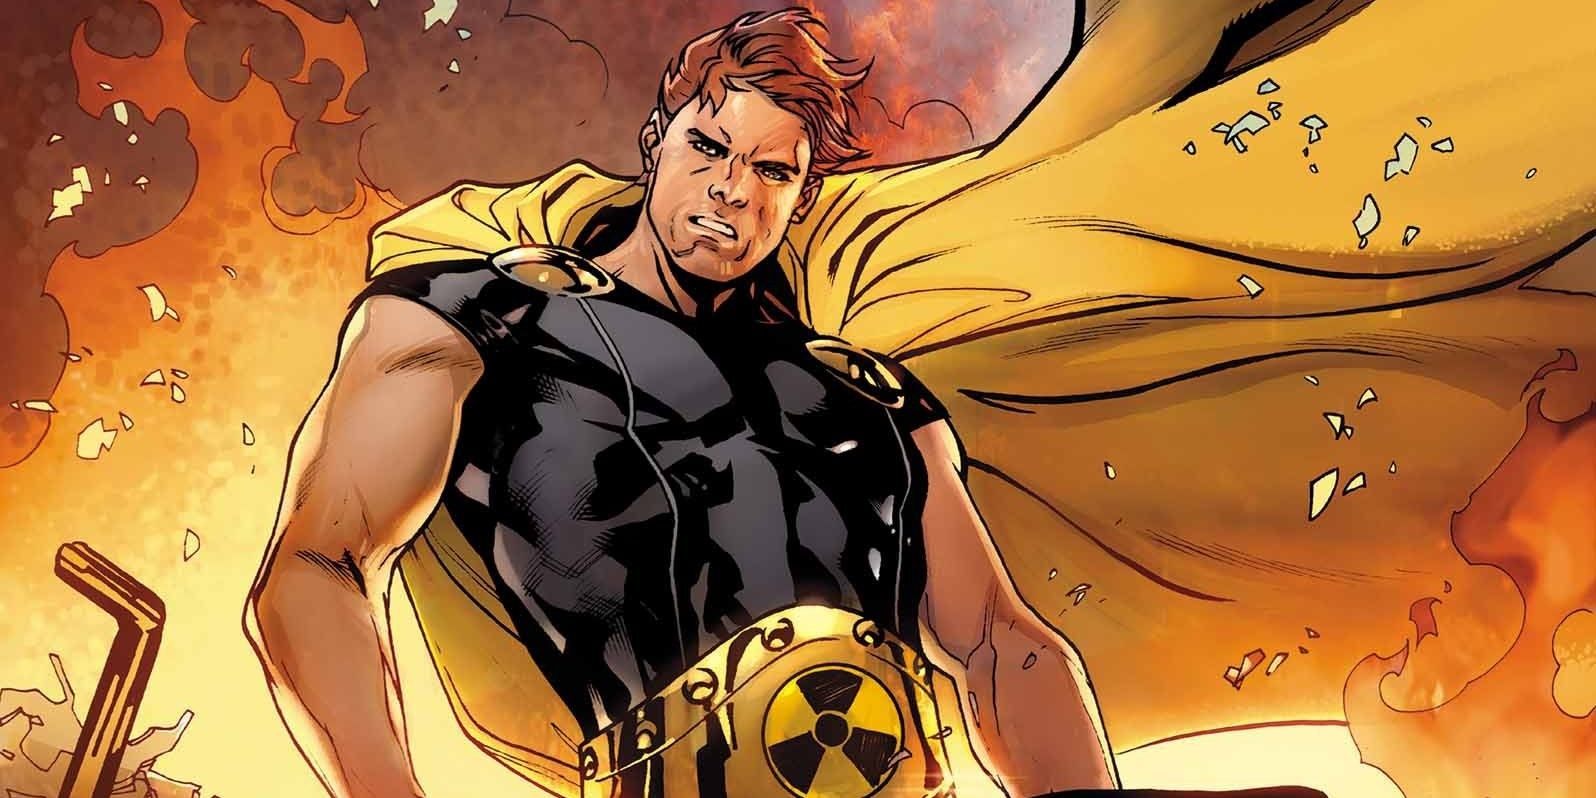 Marvel Comic's Hyperion standing on a pile of burning rubble.